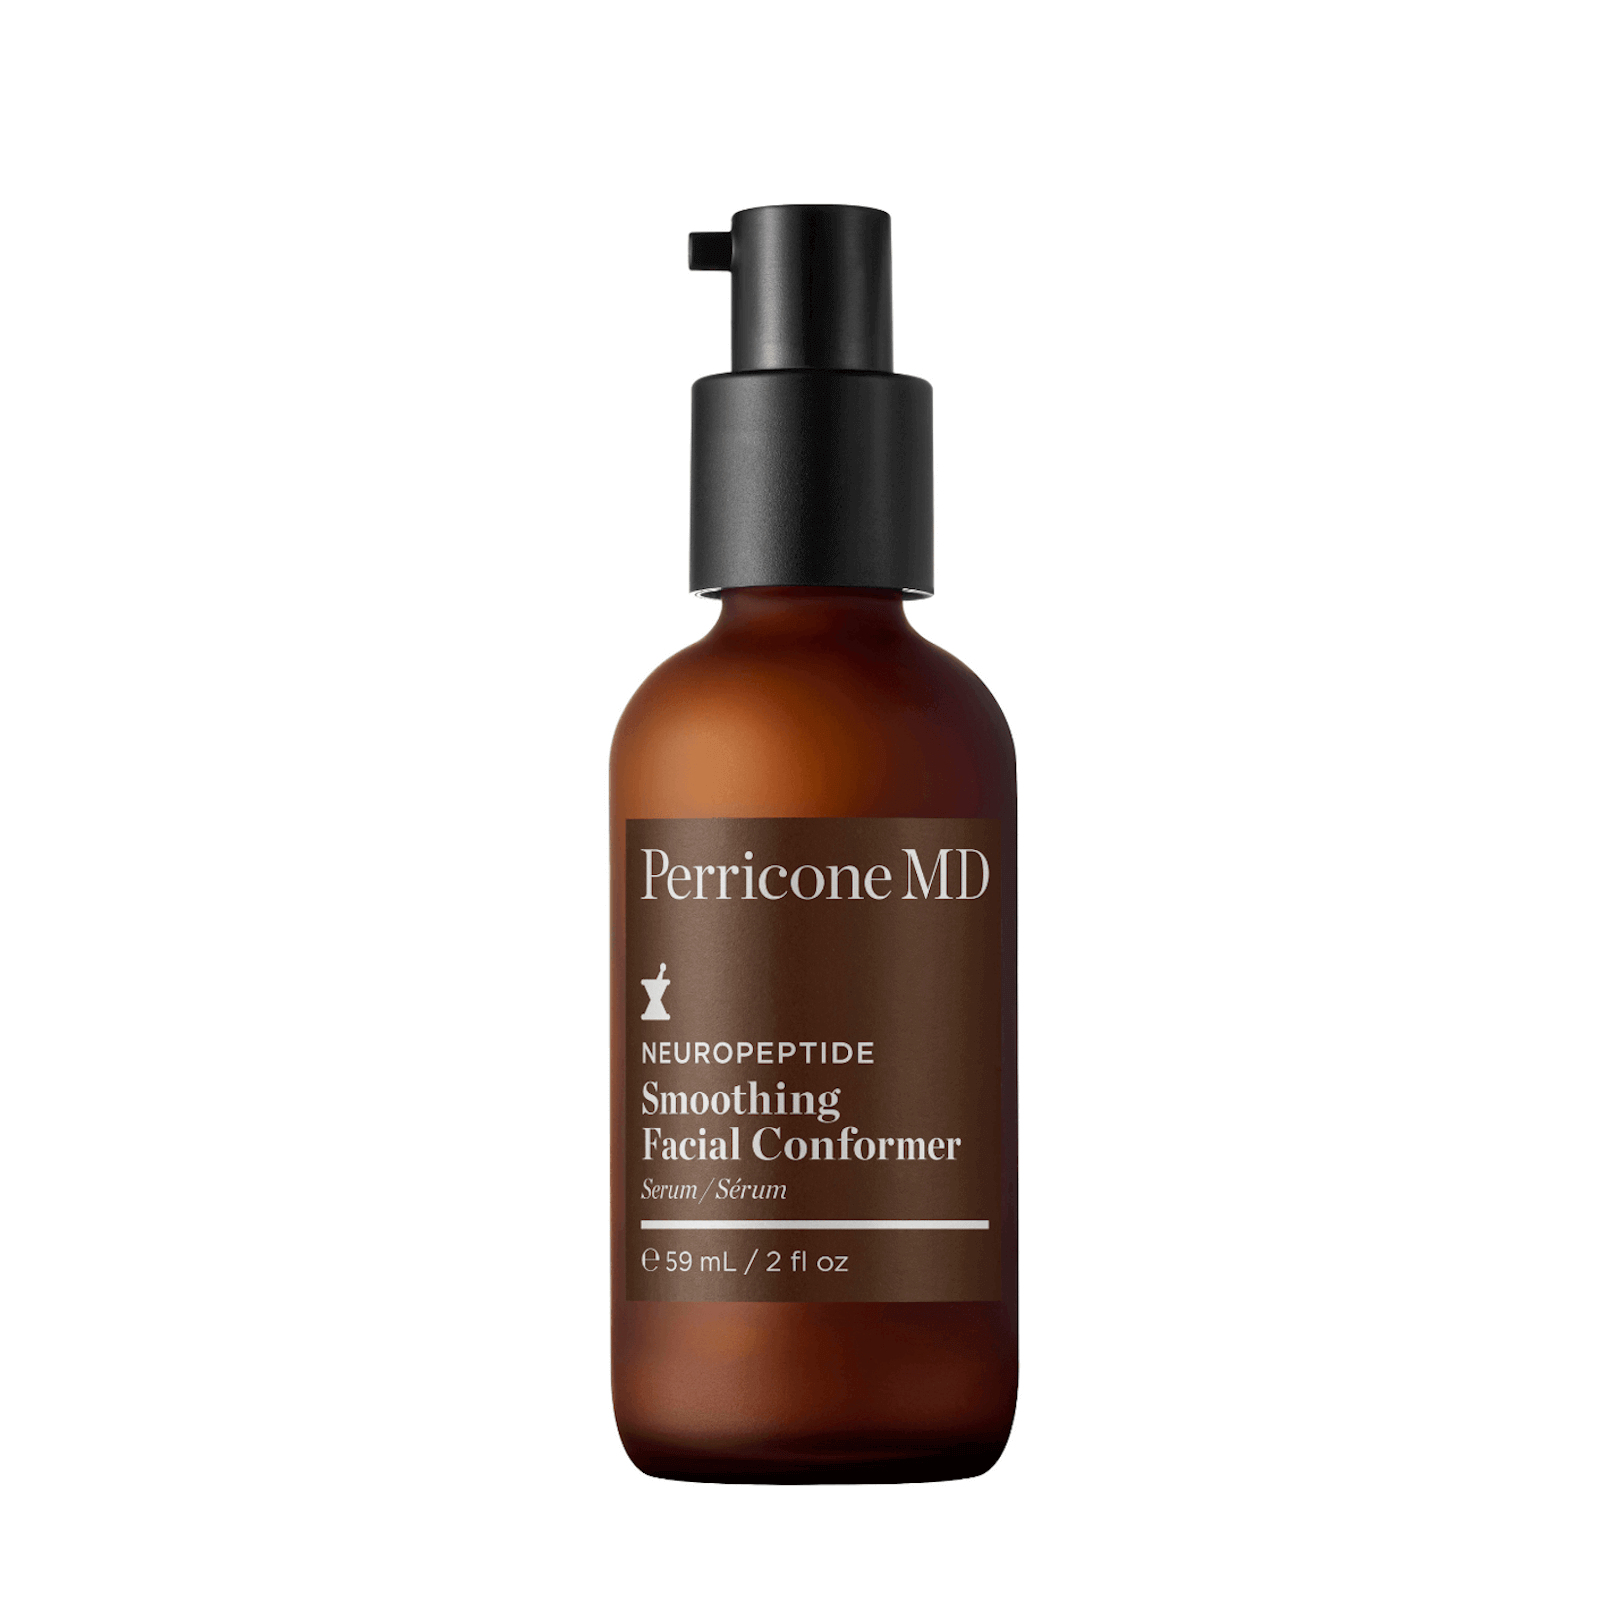 Perricone Md Neuropeptide Smoothing Facial Conformer - 2 oz / 59ml